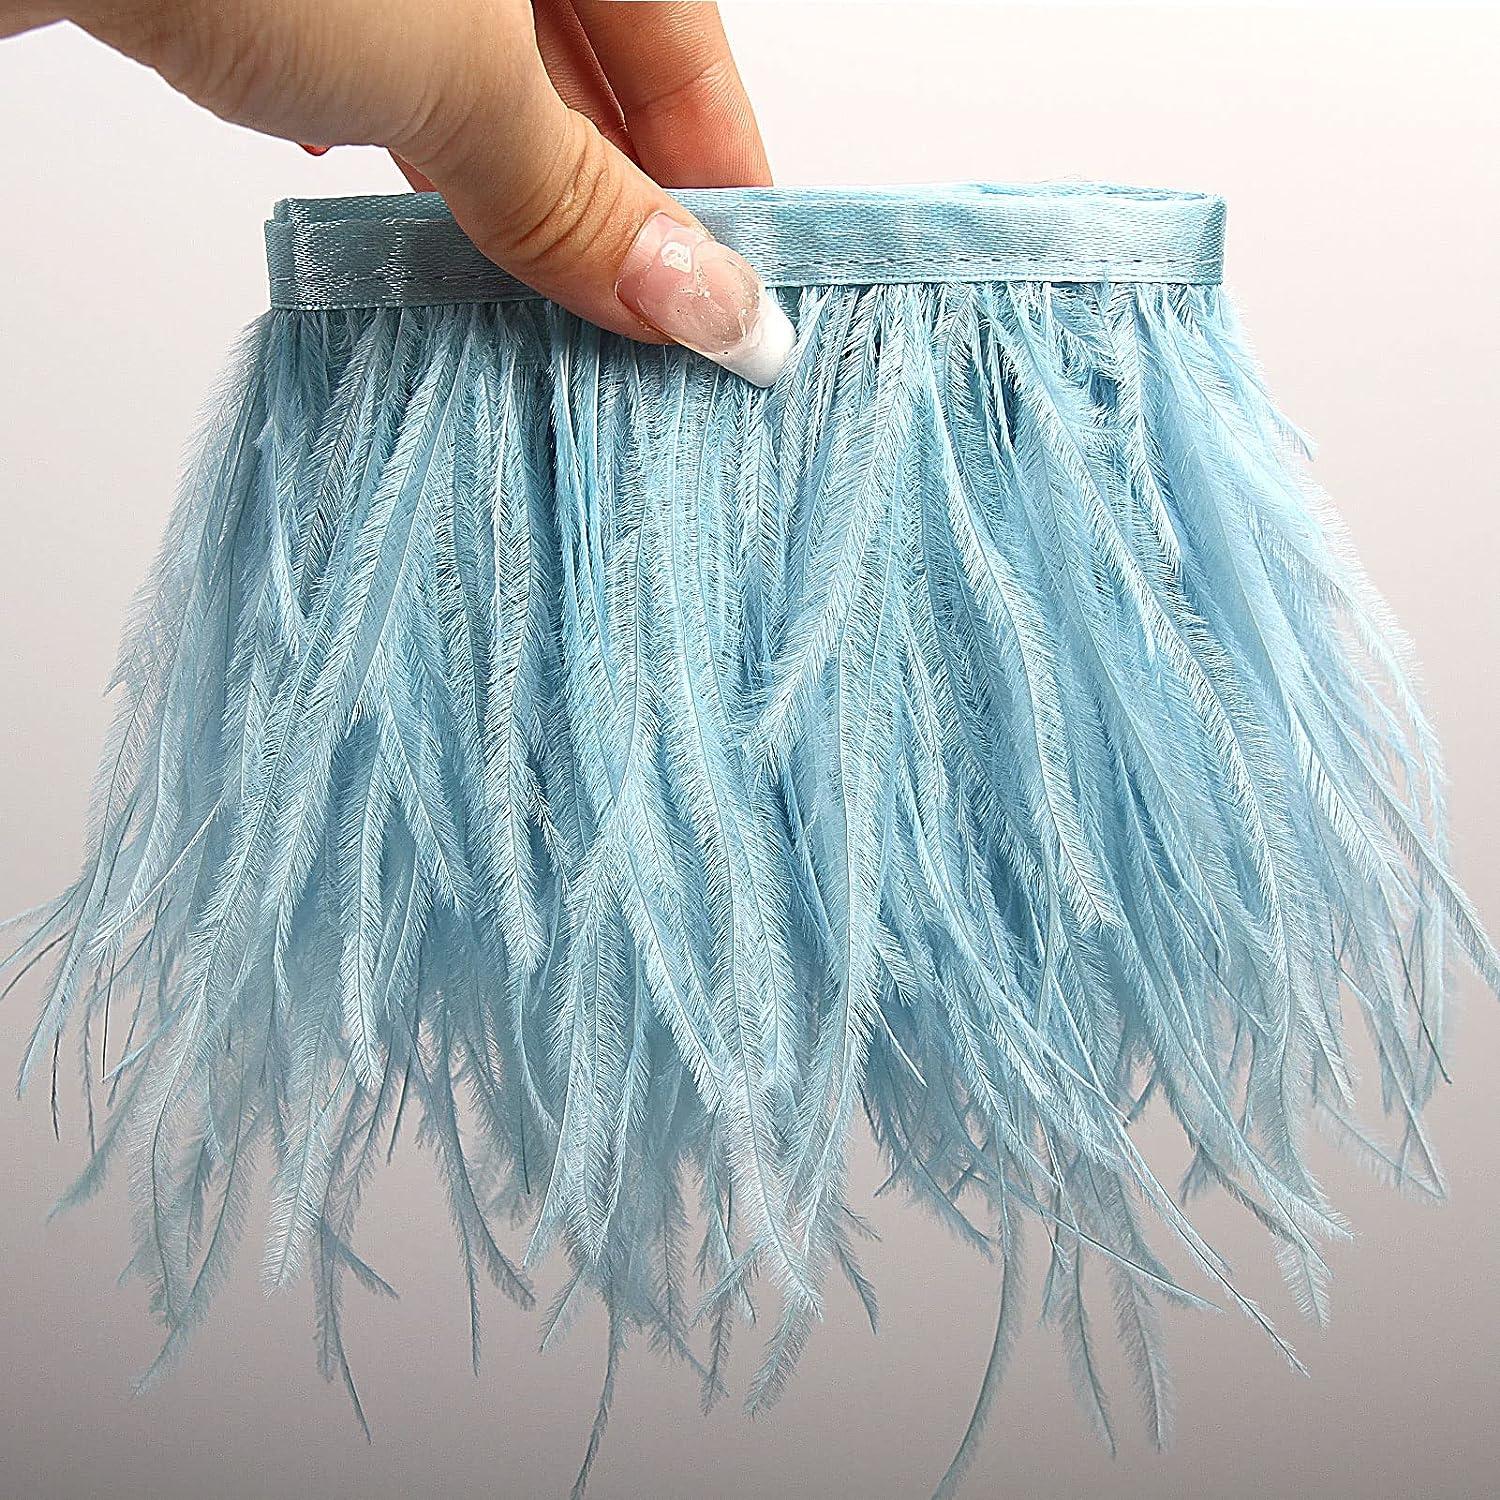 THARAHT Light Blue Ostrich Feathers Trim Sewing Fringe 2Yard 4-6inch for  DIY Dress Sewing Craft Clothing Latin Wedding Dress Decoration Ostrich  Feather Trim